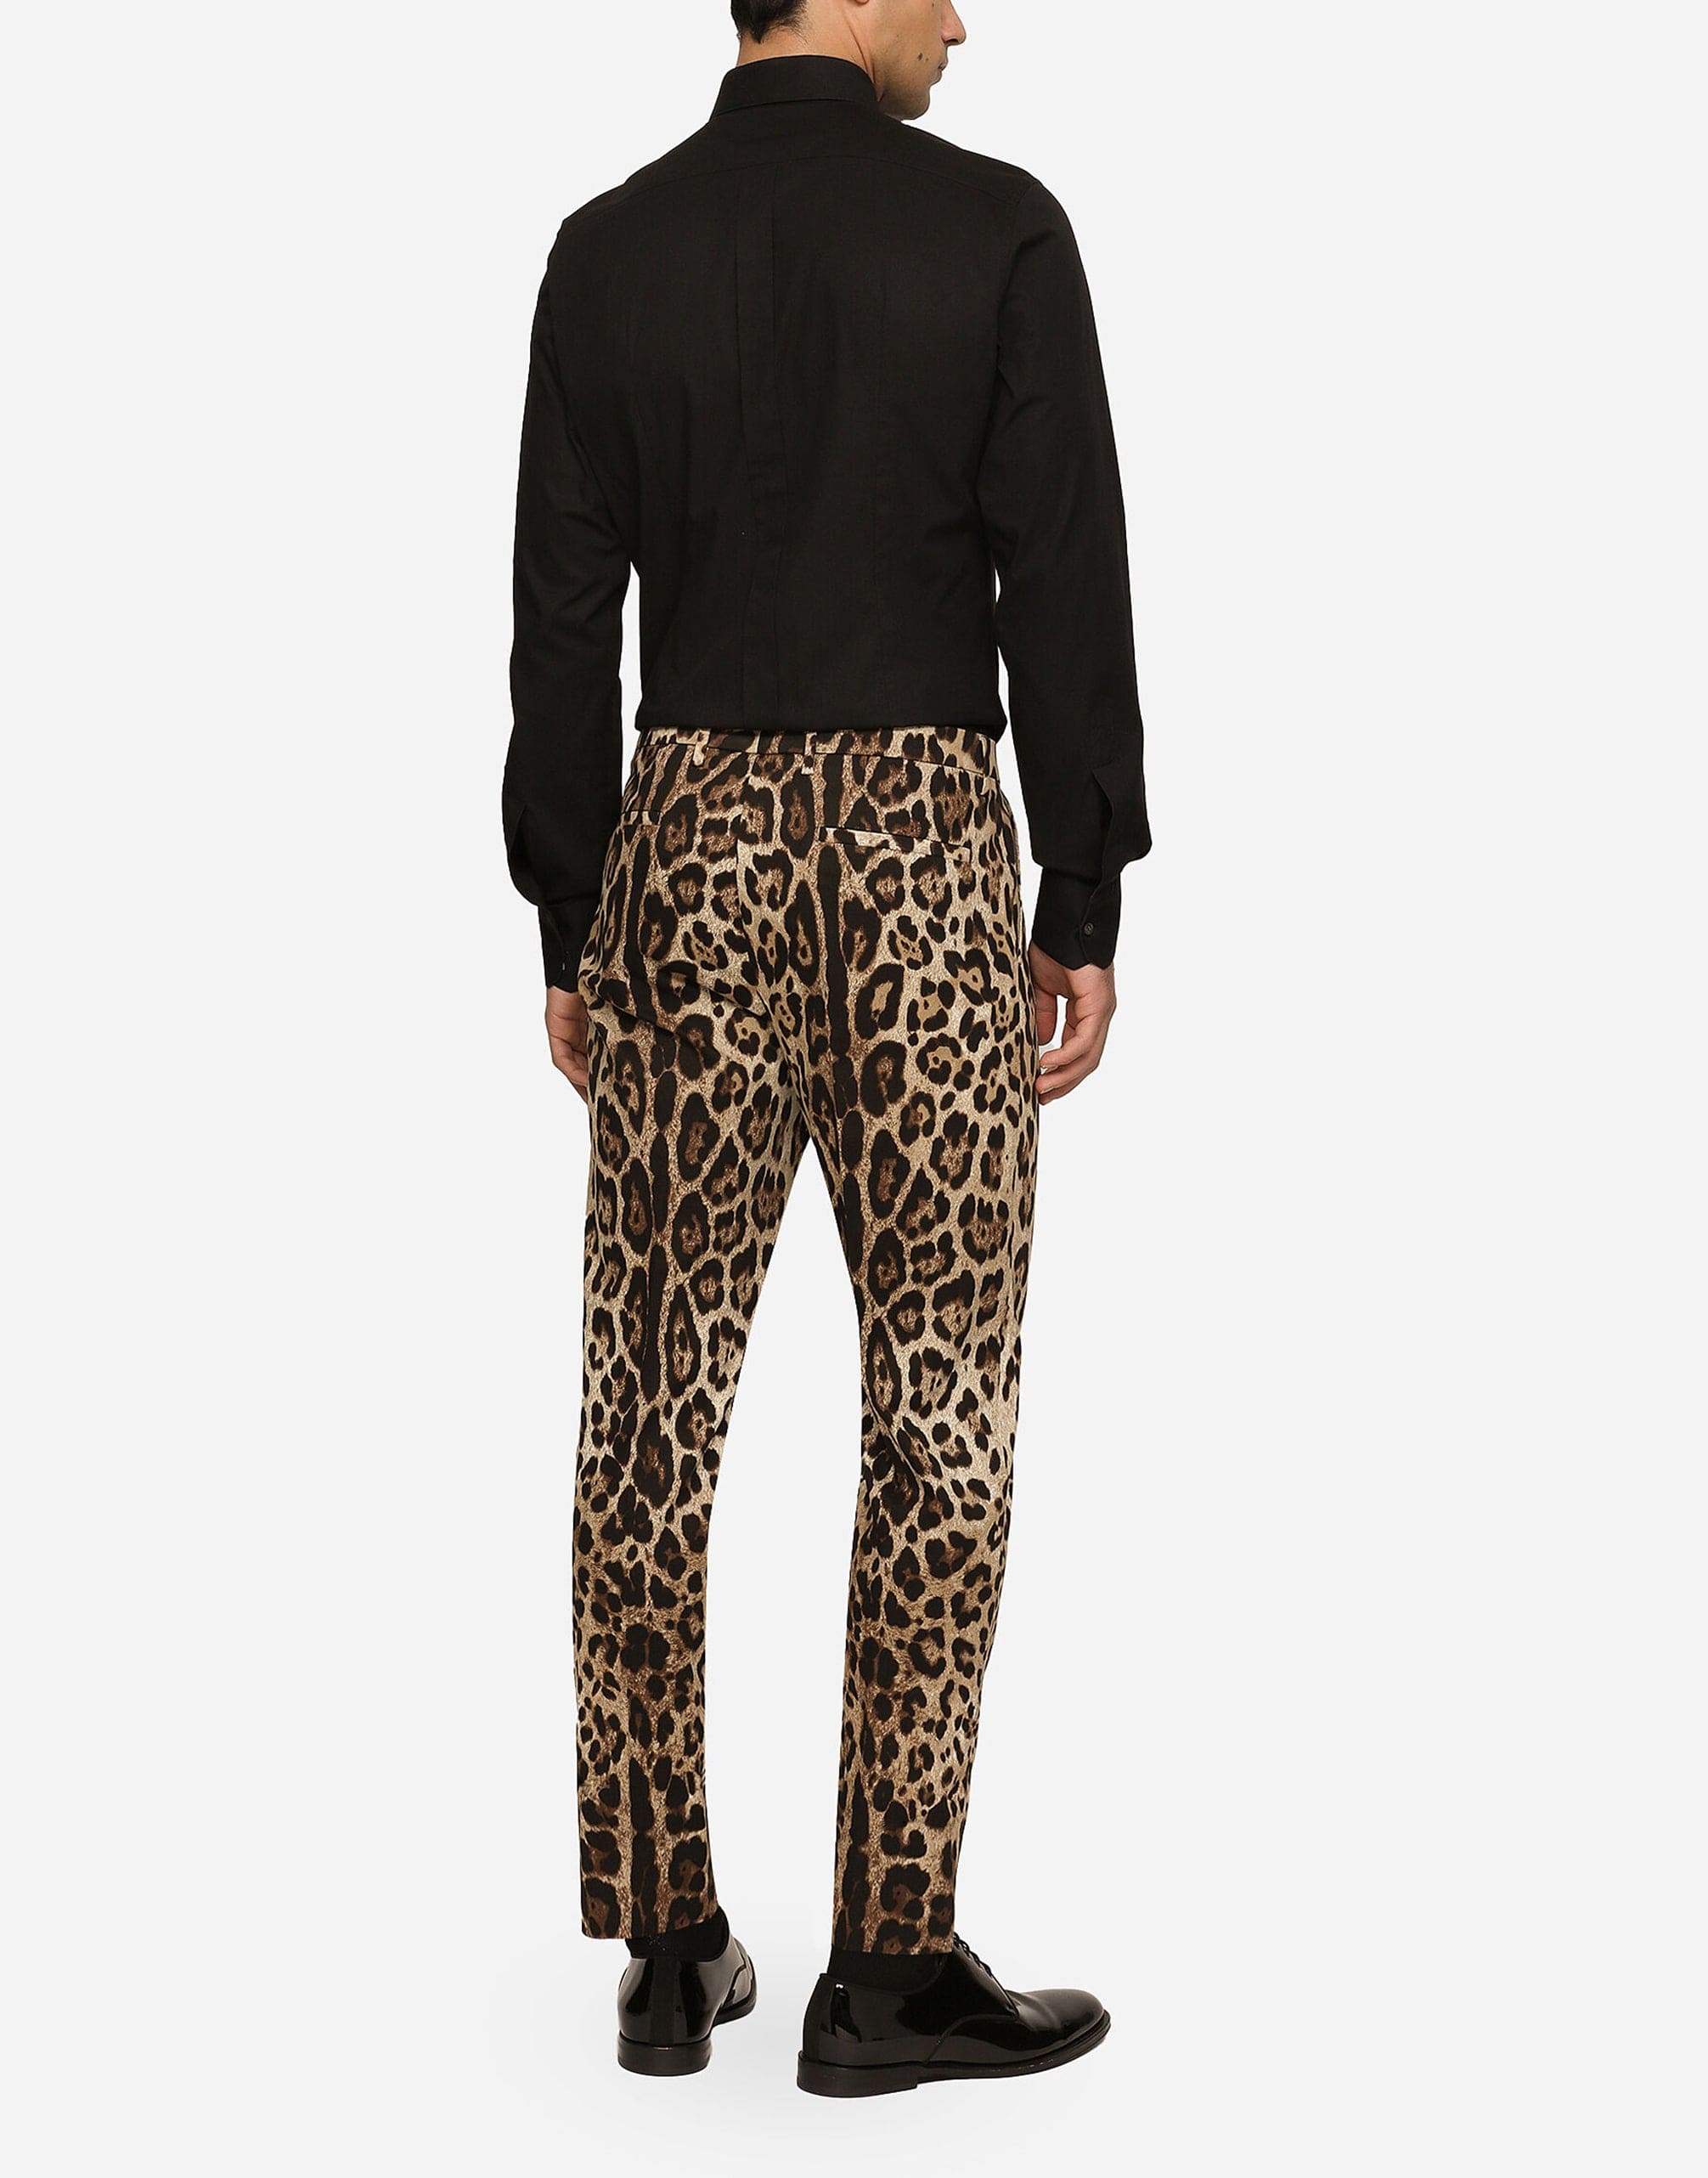 90s Dolce and Gabbana Leopard Animal Print Trousers Pants 